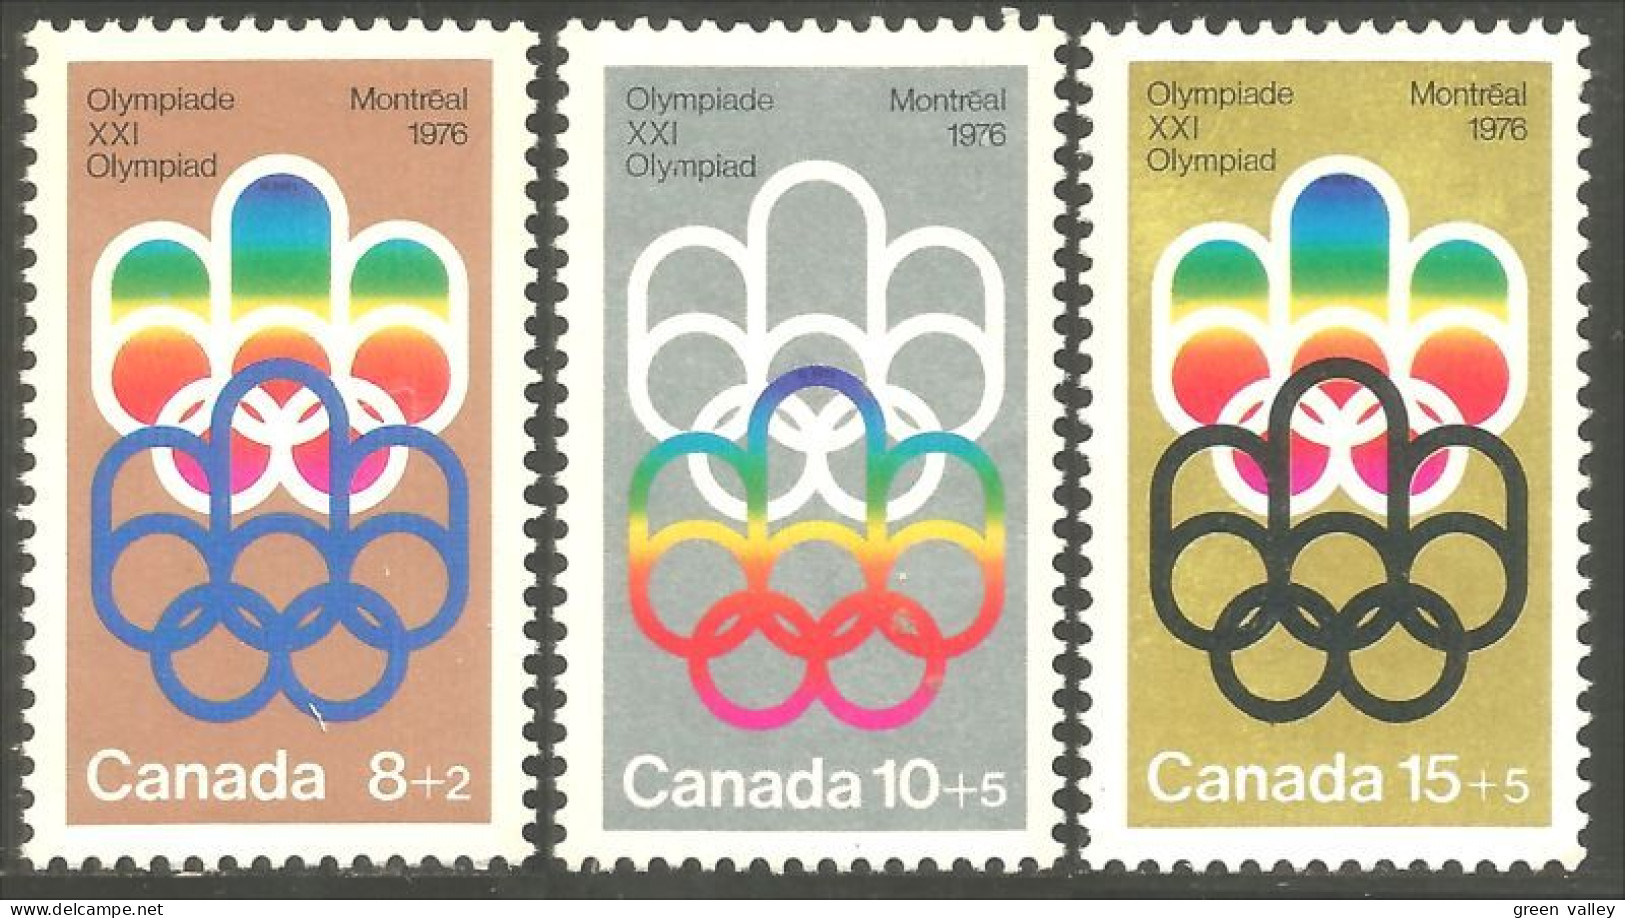 Canada Jeux Olympiques Montreal 1976 Olympic Games MNH ** Neuf SC (CB-01-03c) - Verano 1976: Montréal